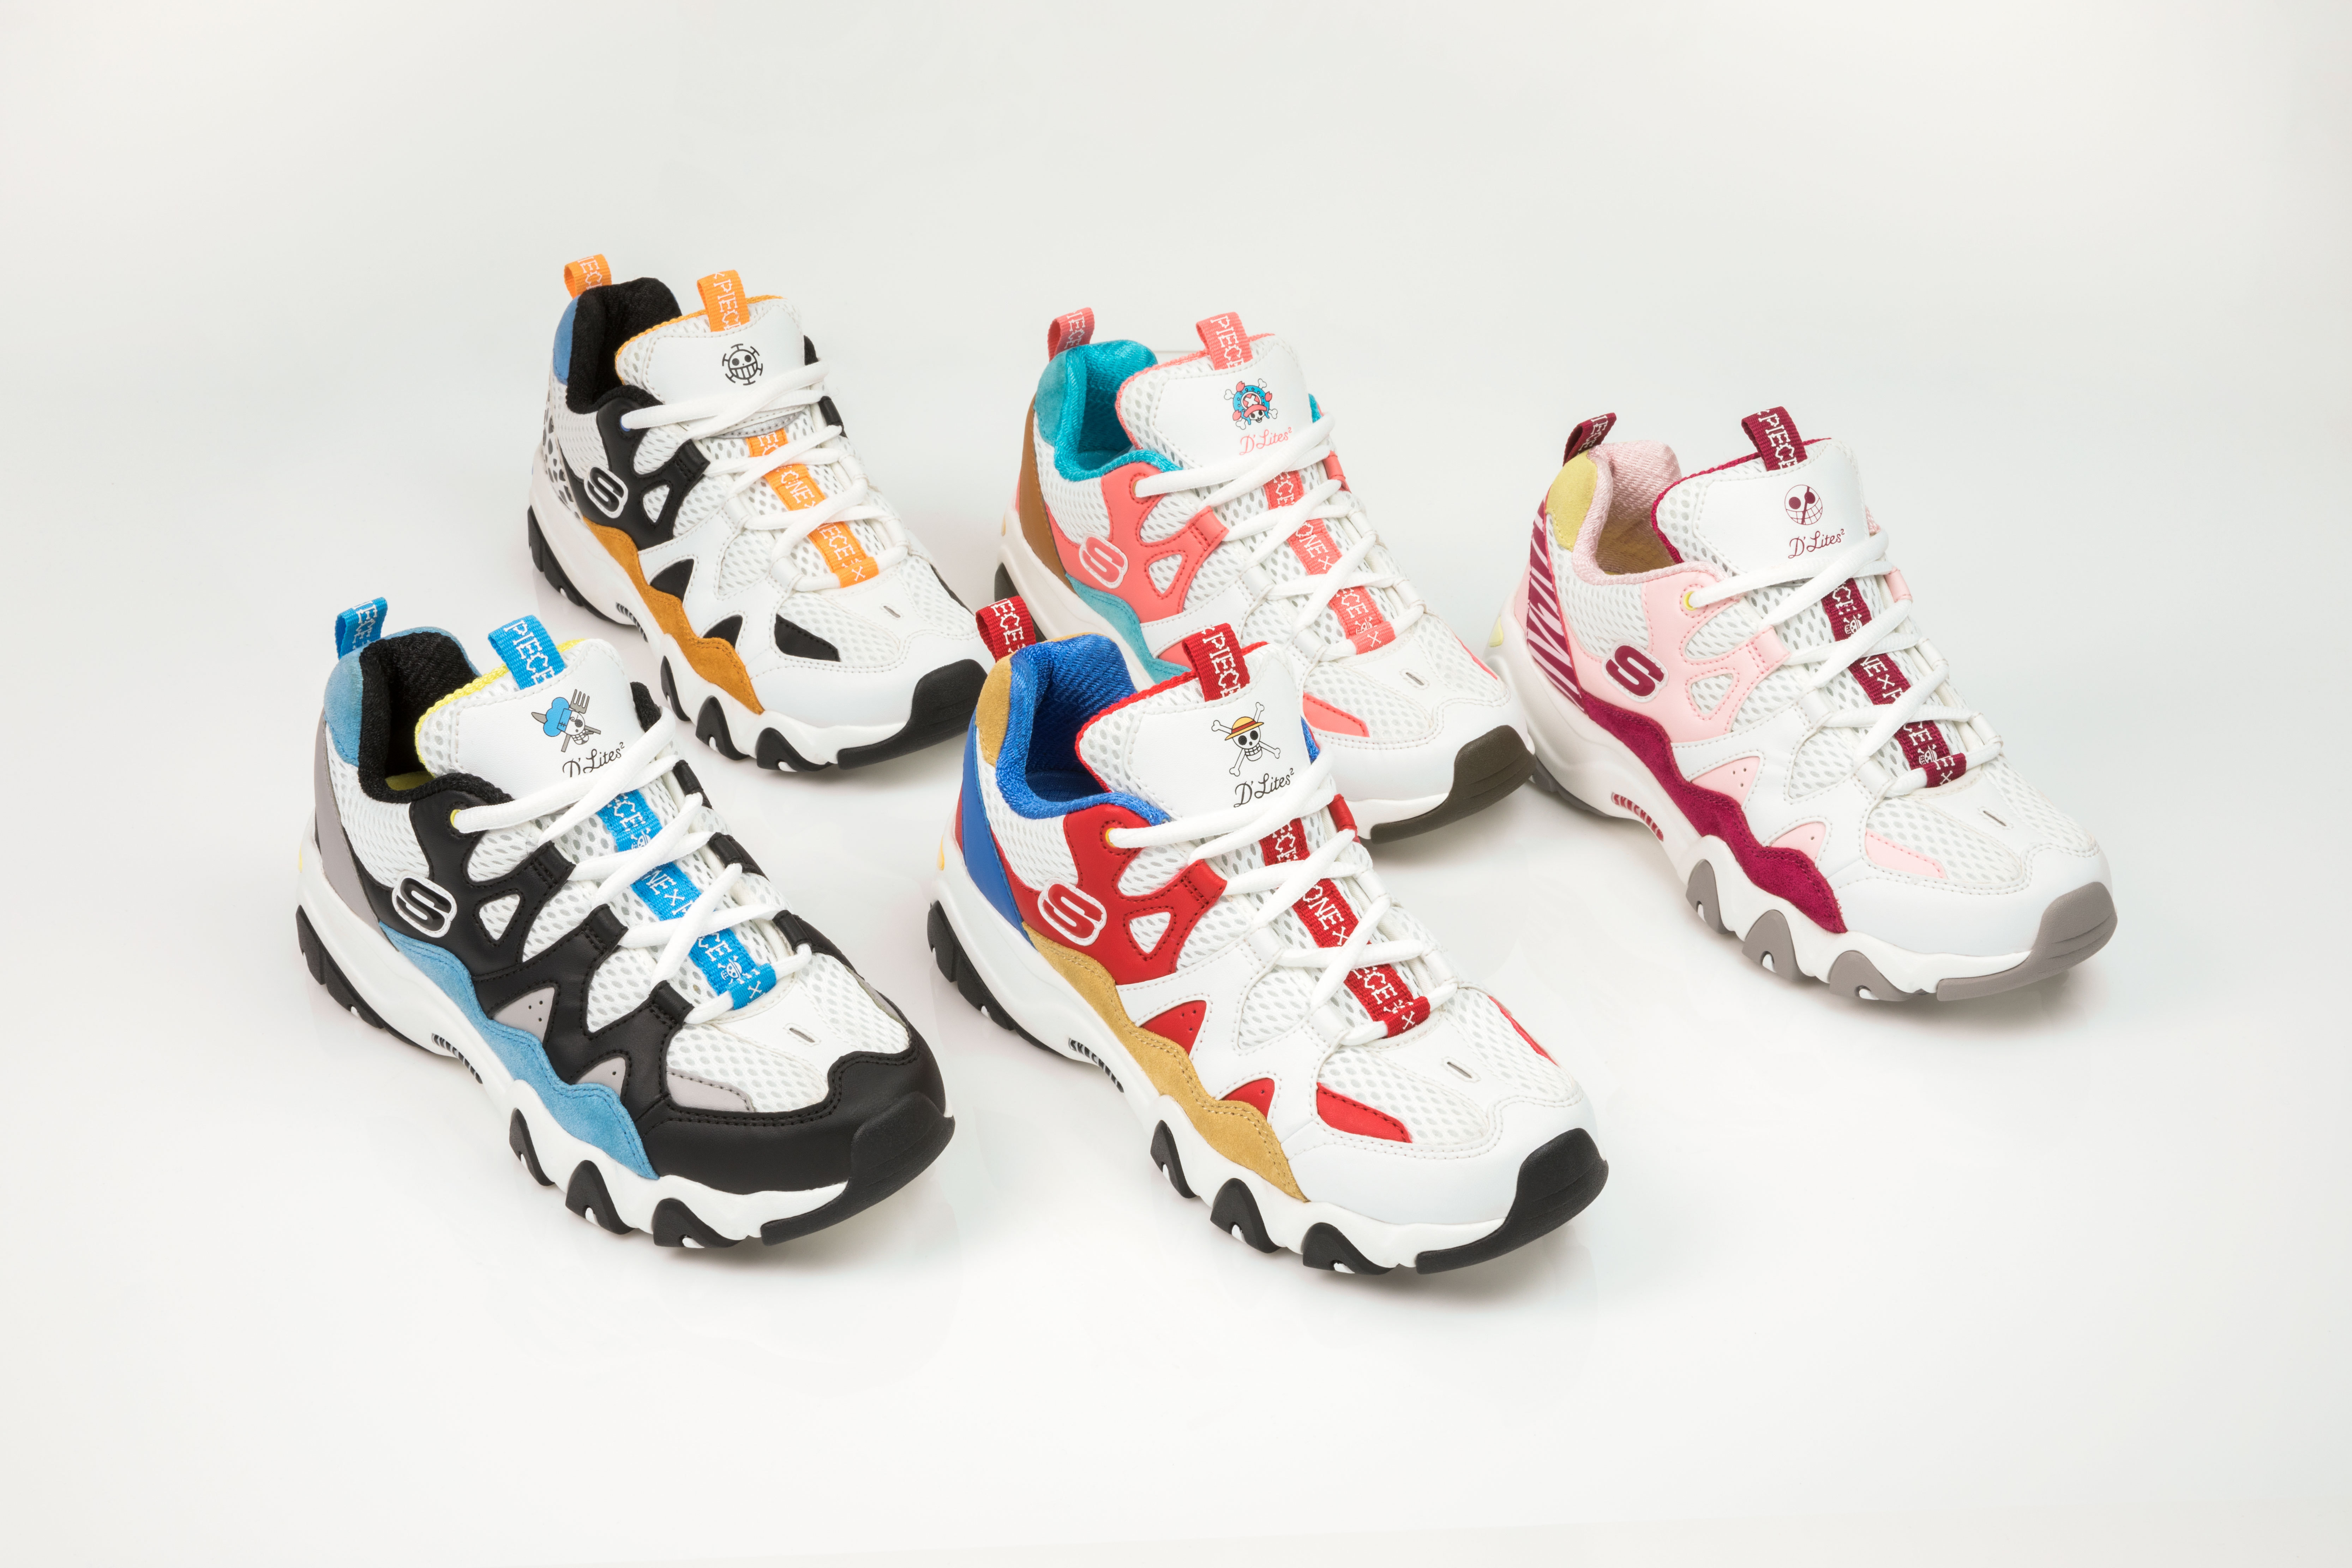 Limited Edition Skechers D'Lites & Animation Inc's One Piece Collection Launch in the United States and Canada | Business Wire